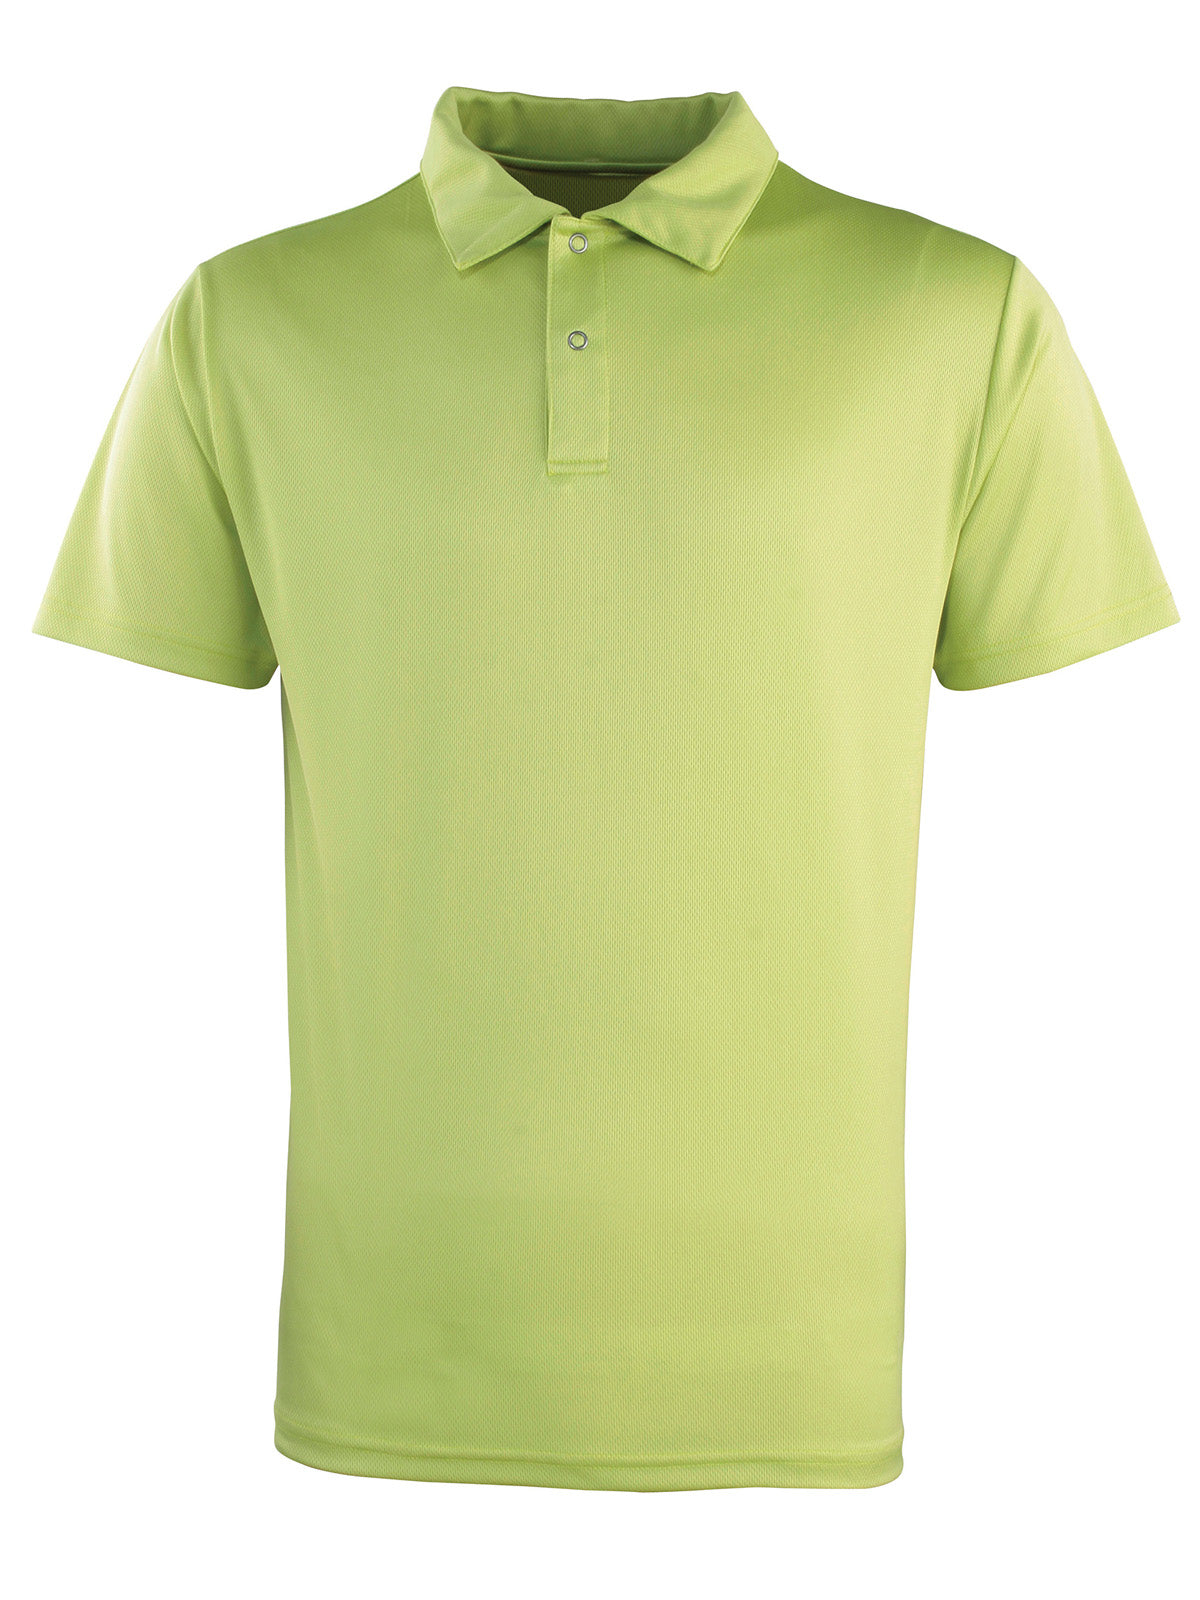 Photo of Premier Coolchecker Studded Polo in Lime, front view